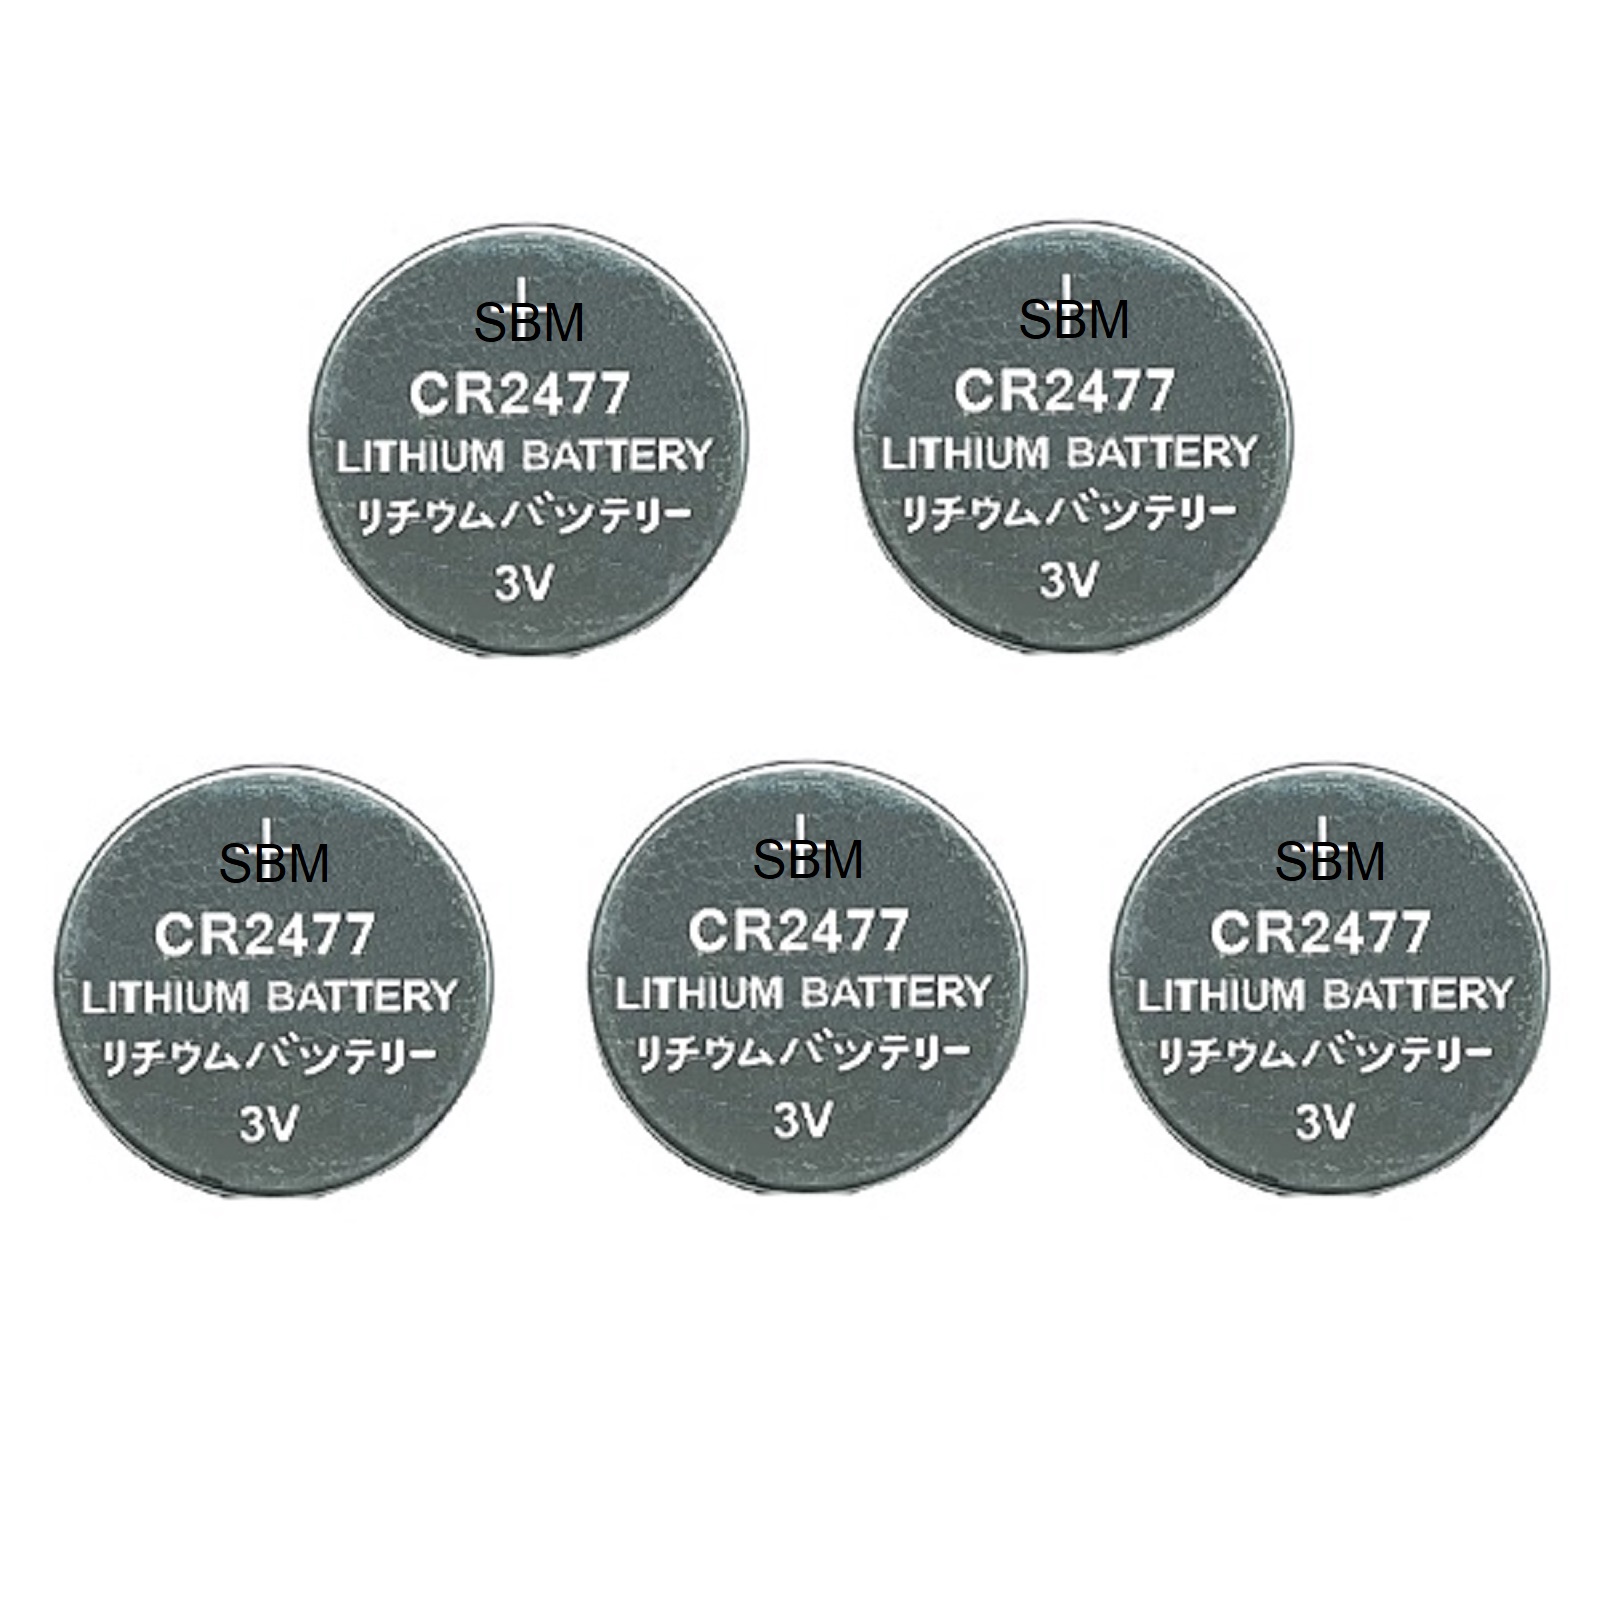 CR2477 Lithium Cell Button Industrial Battery (5 Pieces)